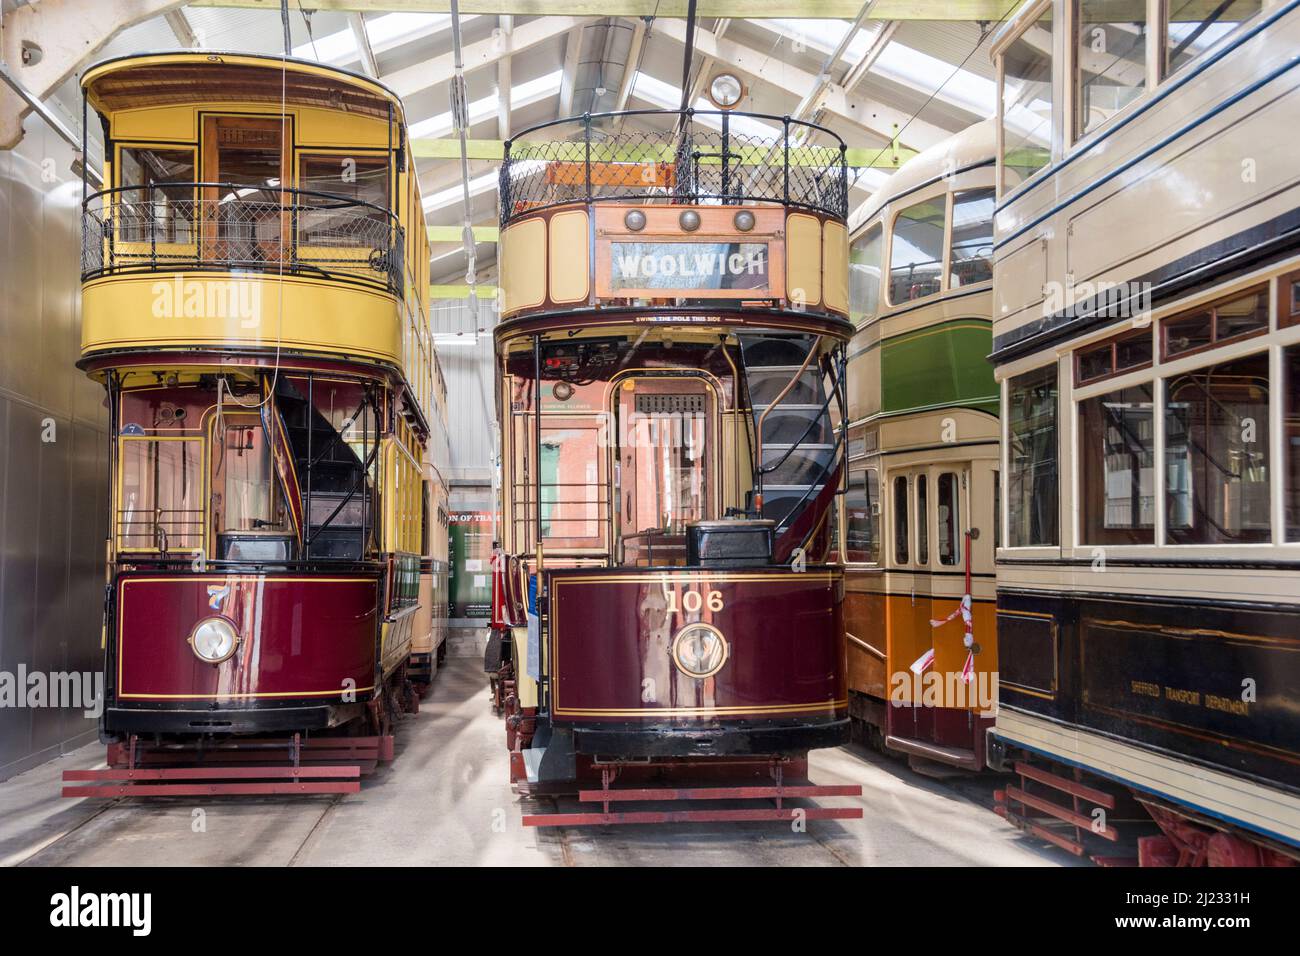 Derbyshire, UK – 5 April 2018: Beautifully restored vintage trams stored in the vehicle garage at Crich Tramway Village, the national tram museum Stock Photo